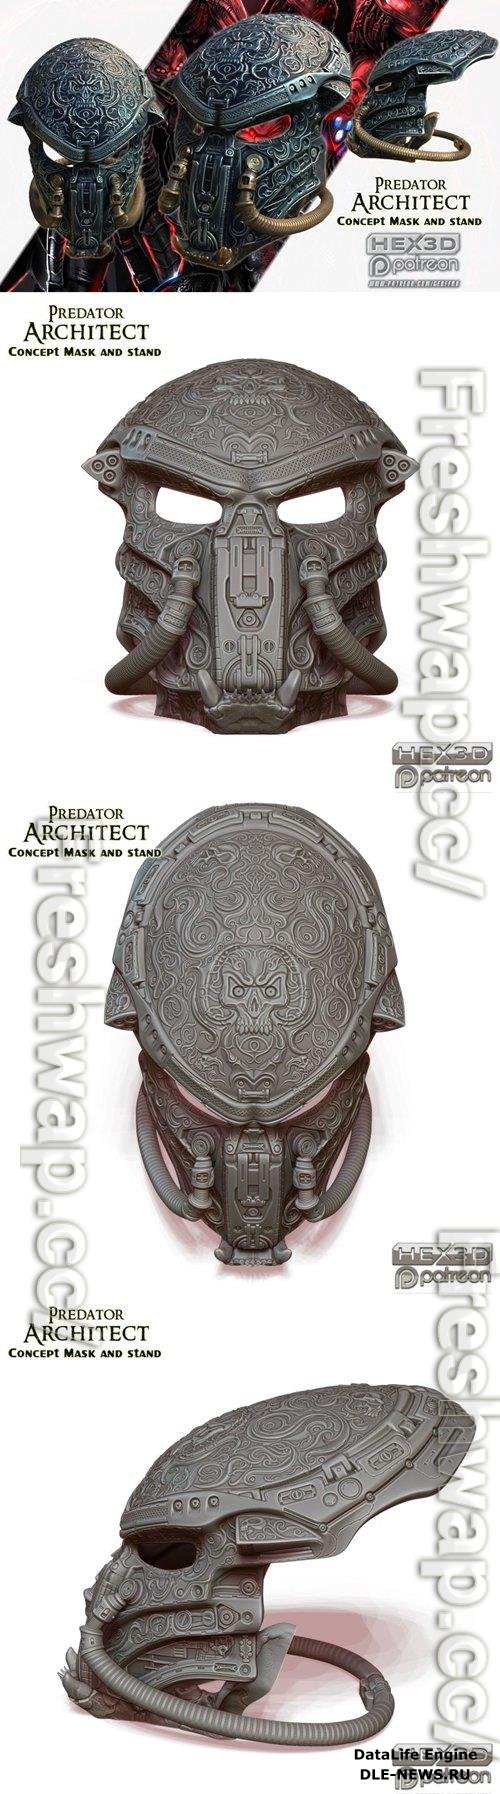 Predator Architect Concept Mask and Stand 3D Print